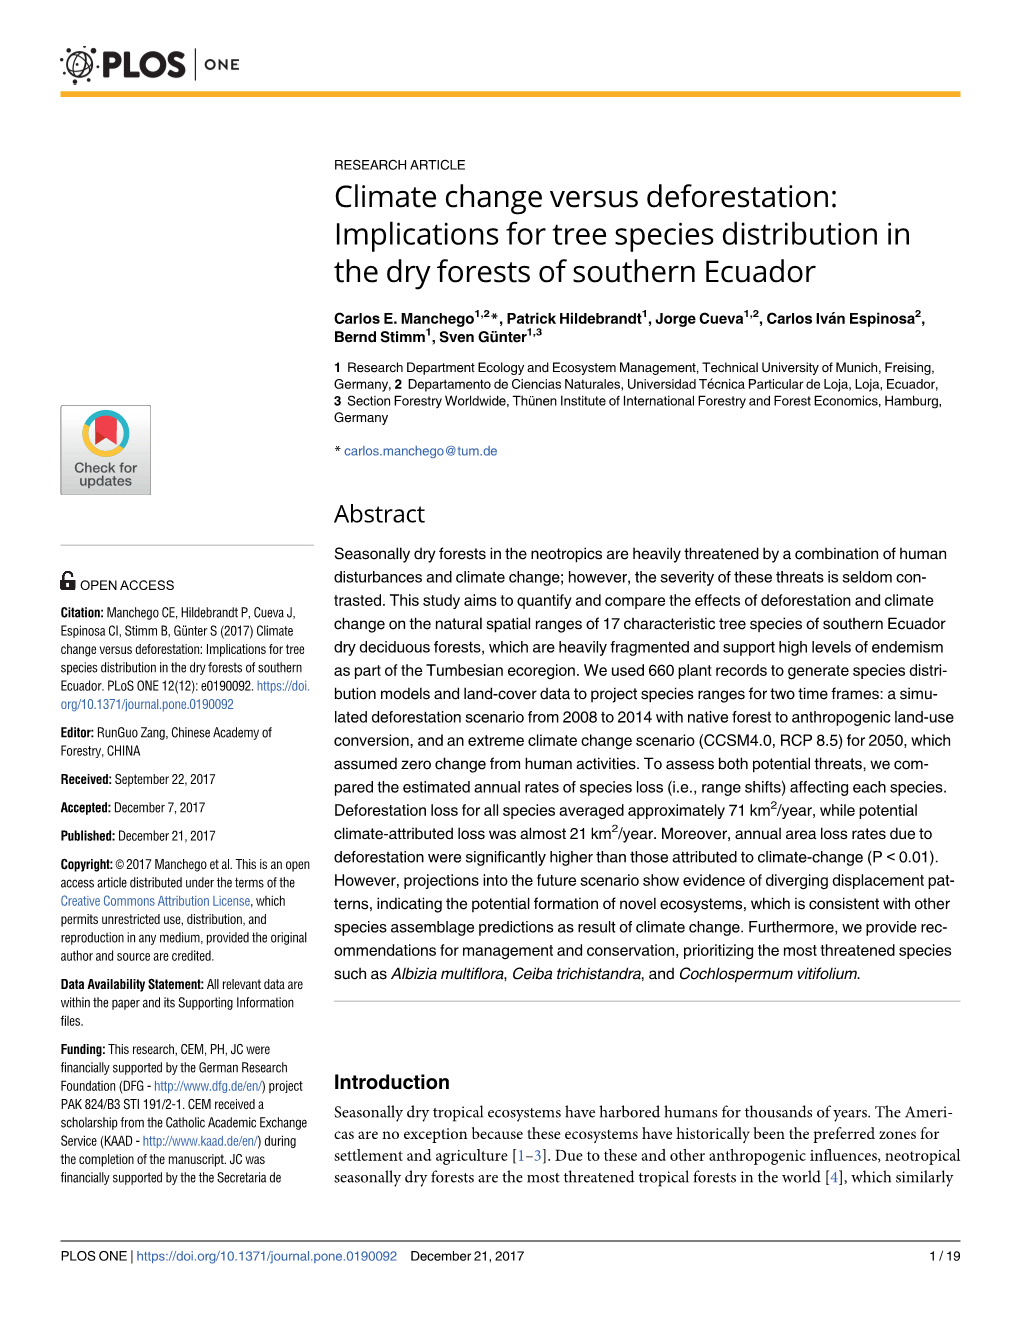 Climate Change Versus Deforestation: Implications for Tree Species Distribution in the Dry Forests of Southern Ecuador